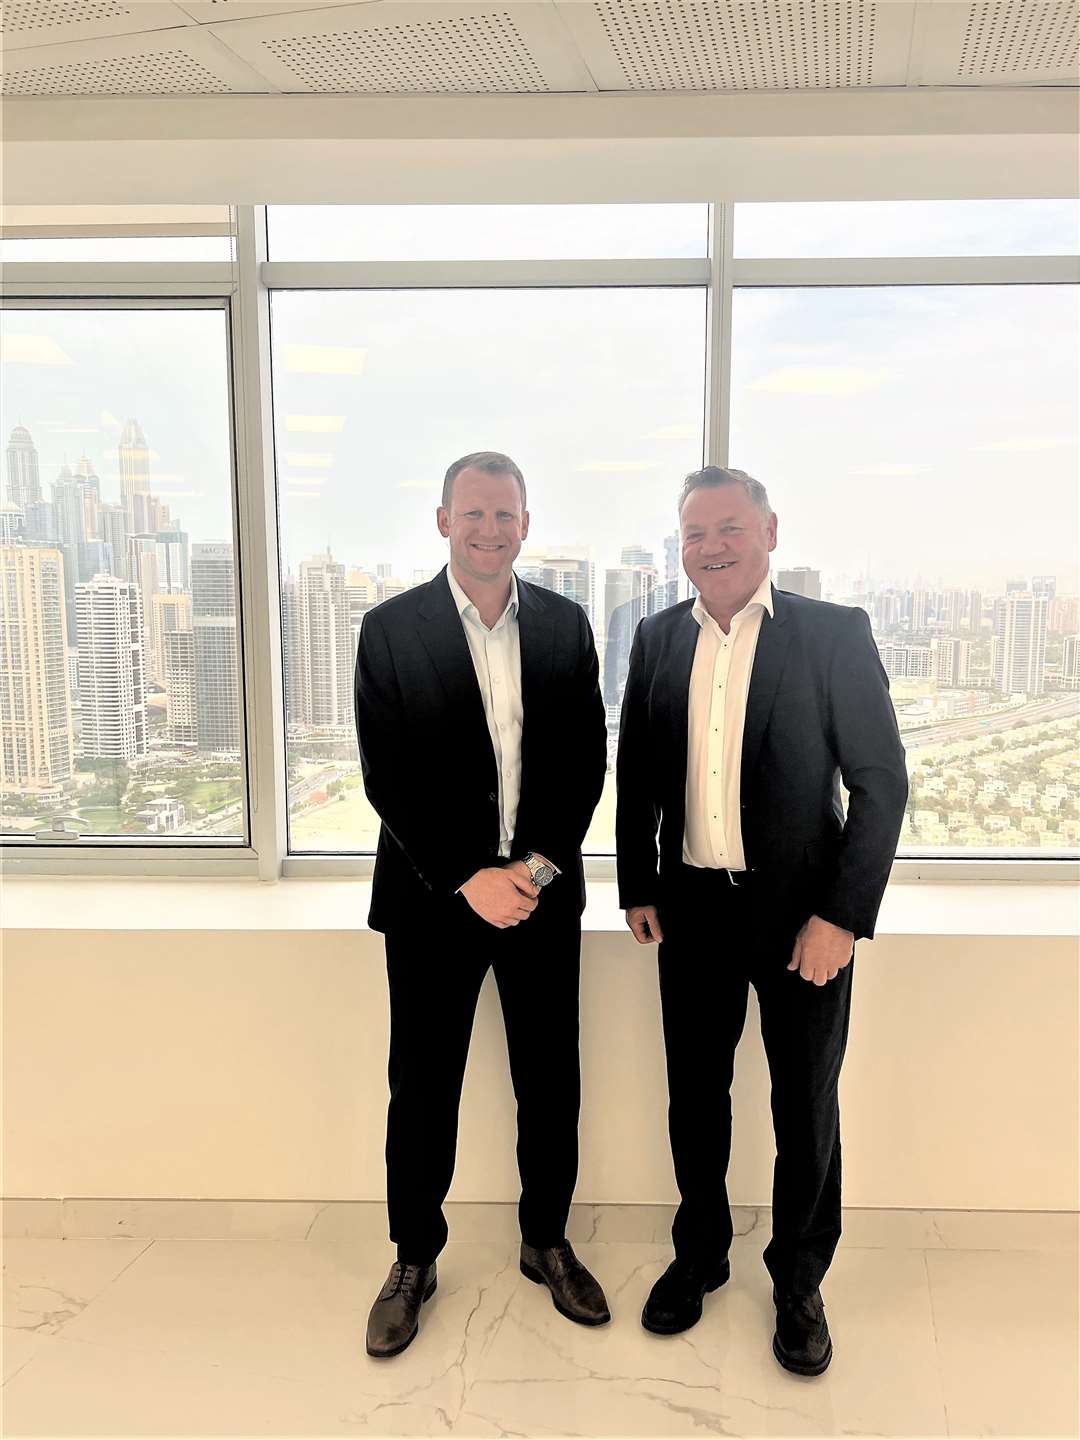 Ross Anderson, Regional Manager at ACE Winches and Alfie Cheyne, Founderand Chairman at ACE Winches, pictured in Dubai.